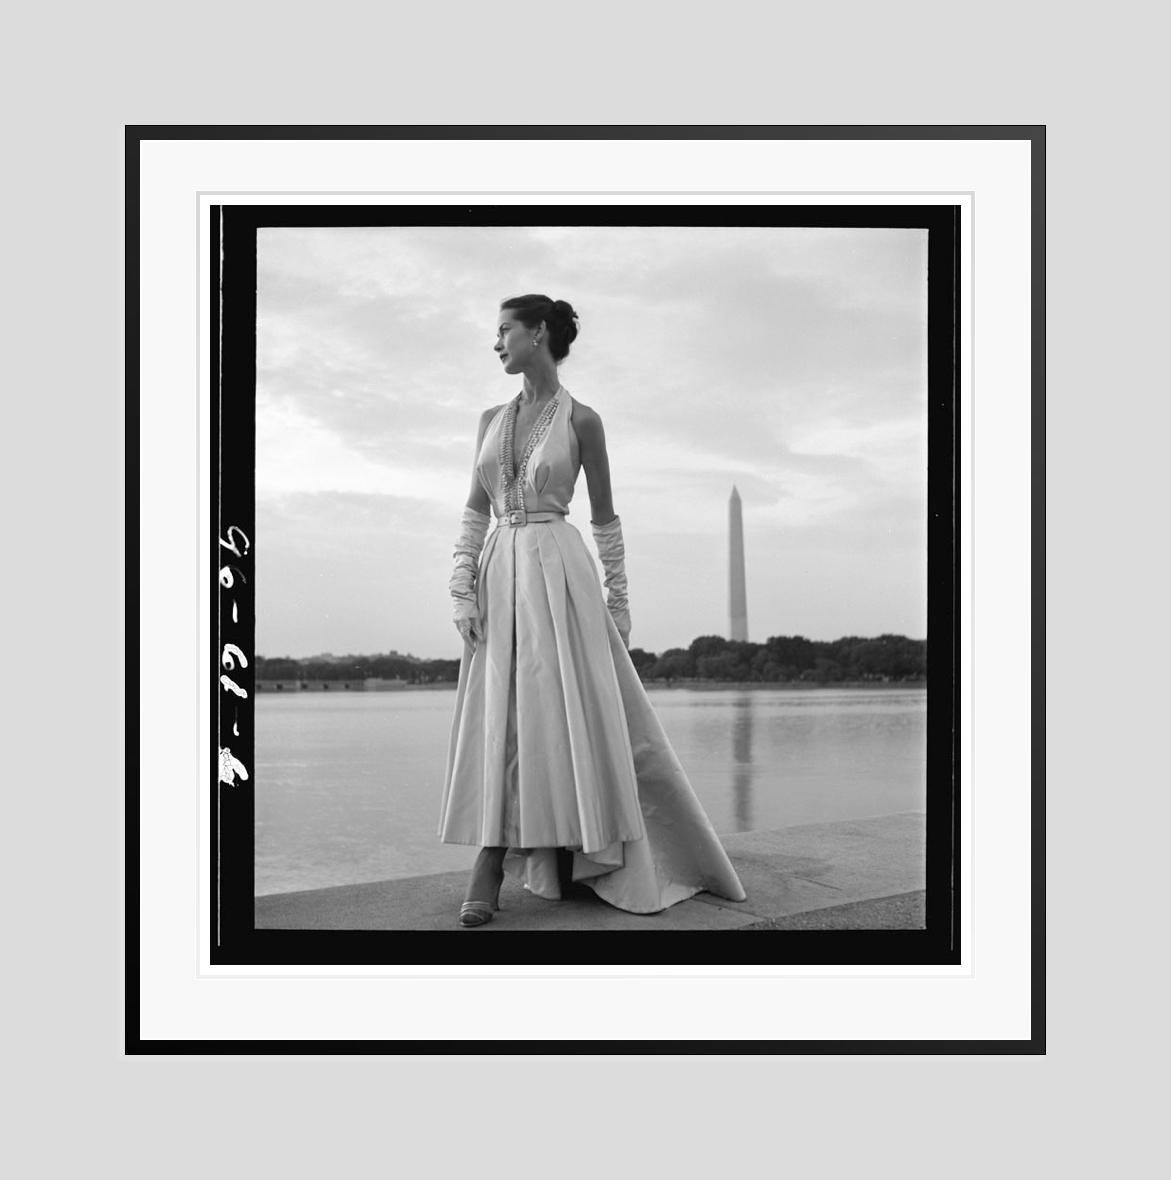 Washington Monument Fashion Shoot 

1949

Fashion model posing in an evening gown with Tidal Basin and Washington Monument in the background, USA, 1949
 
by Toni Frissell

30 x 30